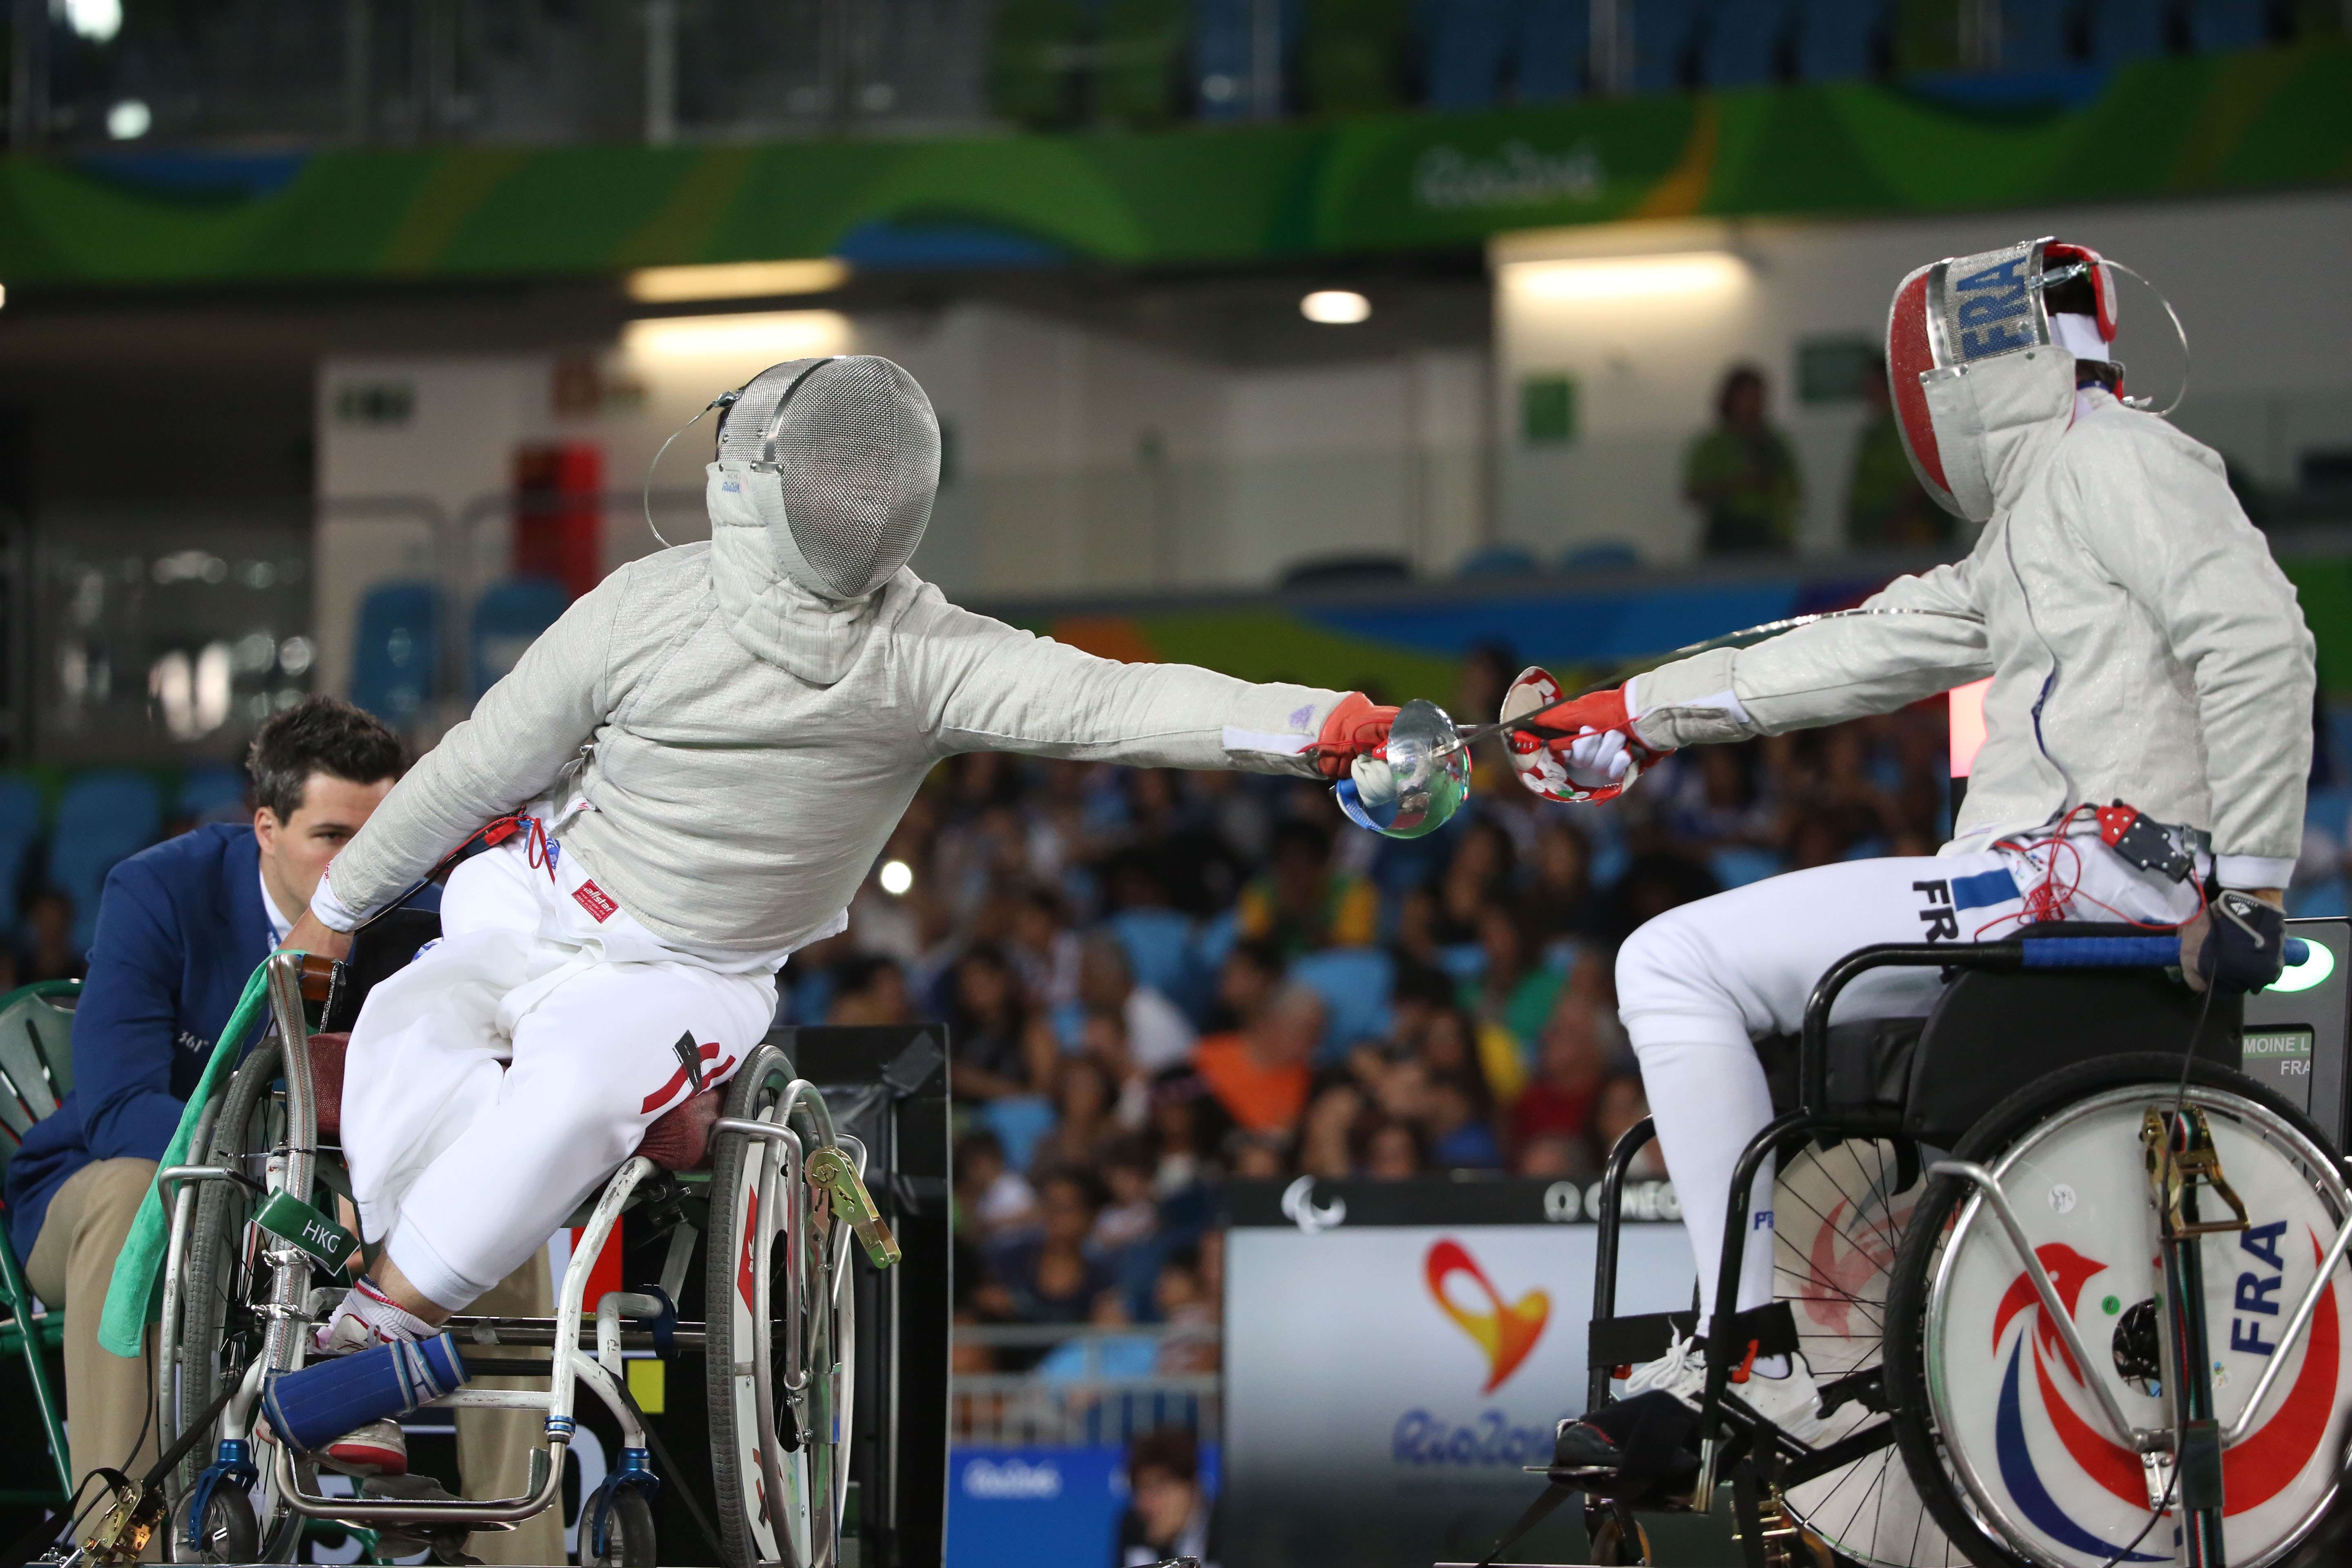 Hong Kong’s best medal hopes are in wheelchair fencing. Photo: HK Paralympic Committee